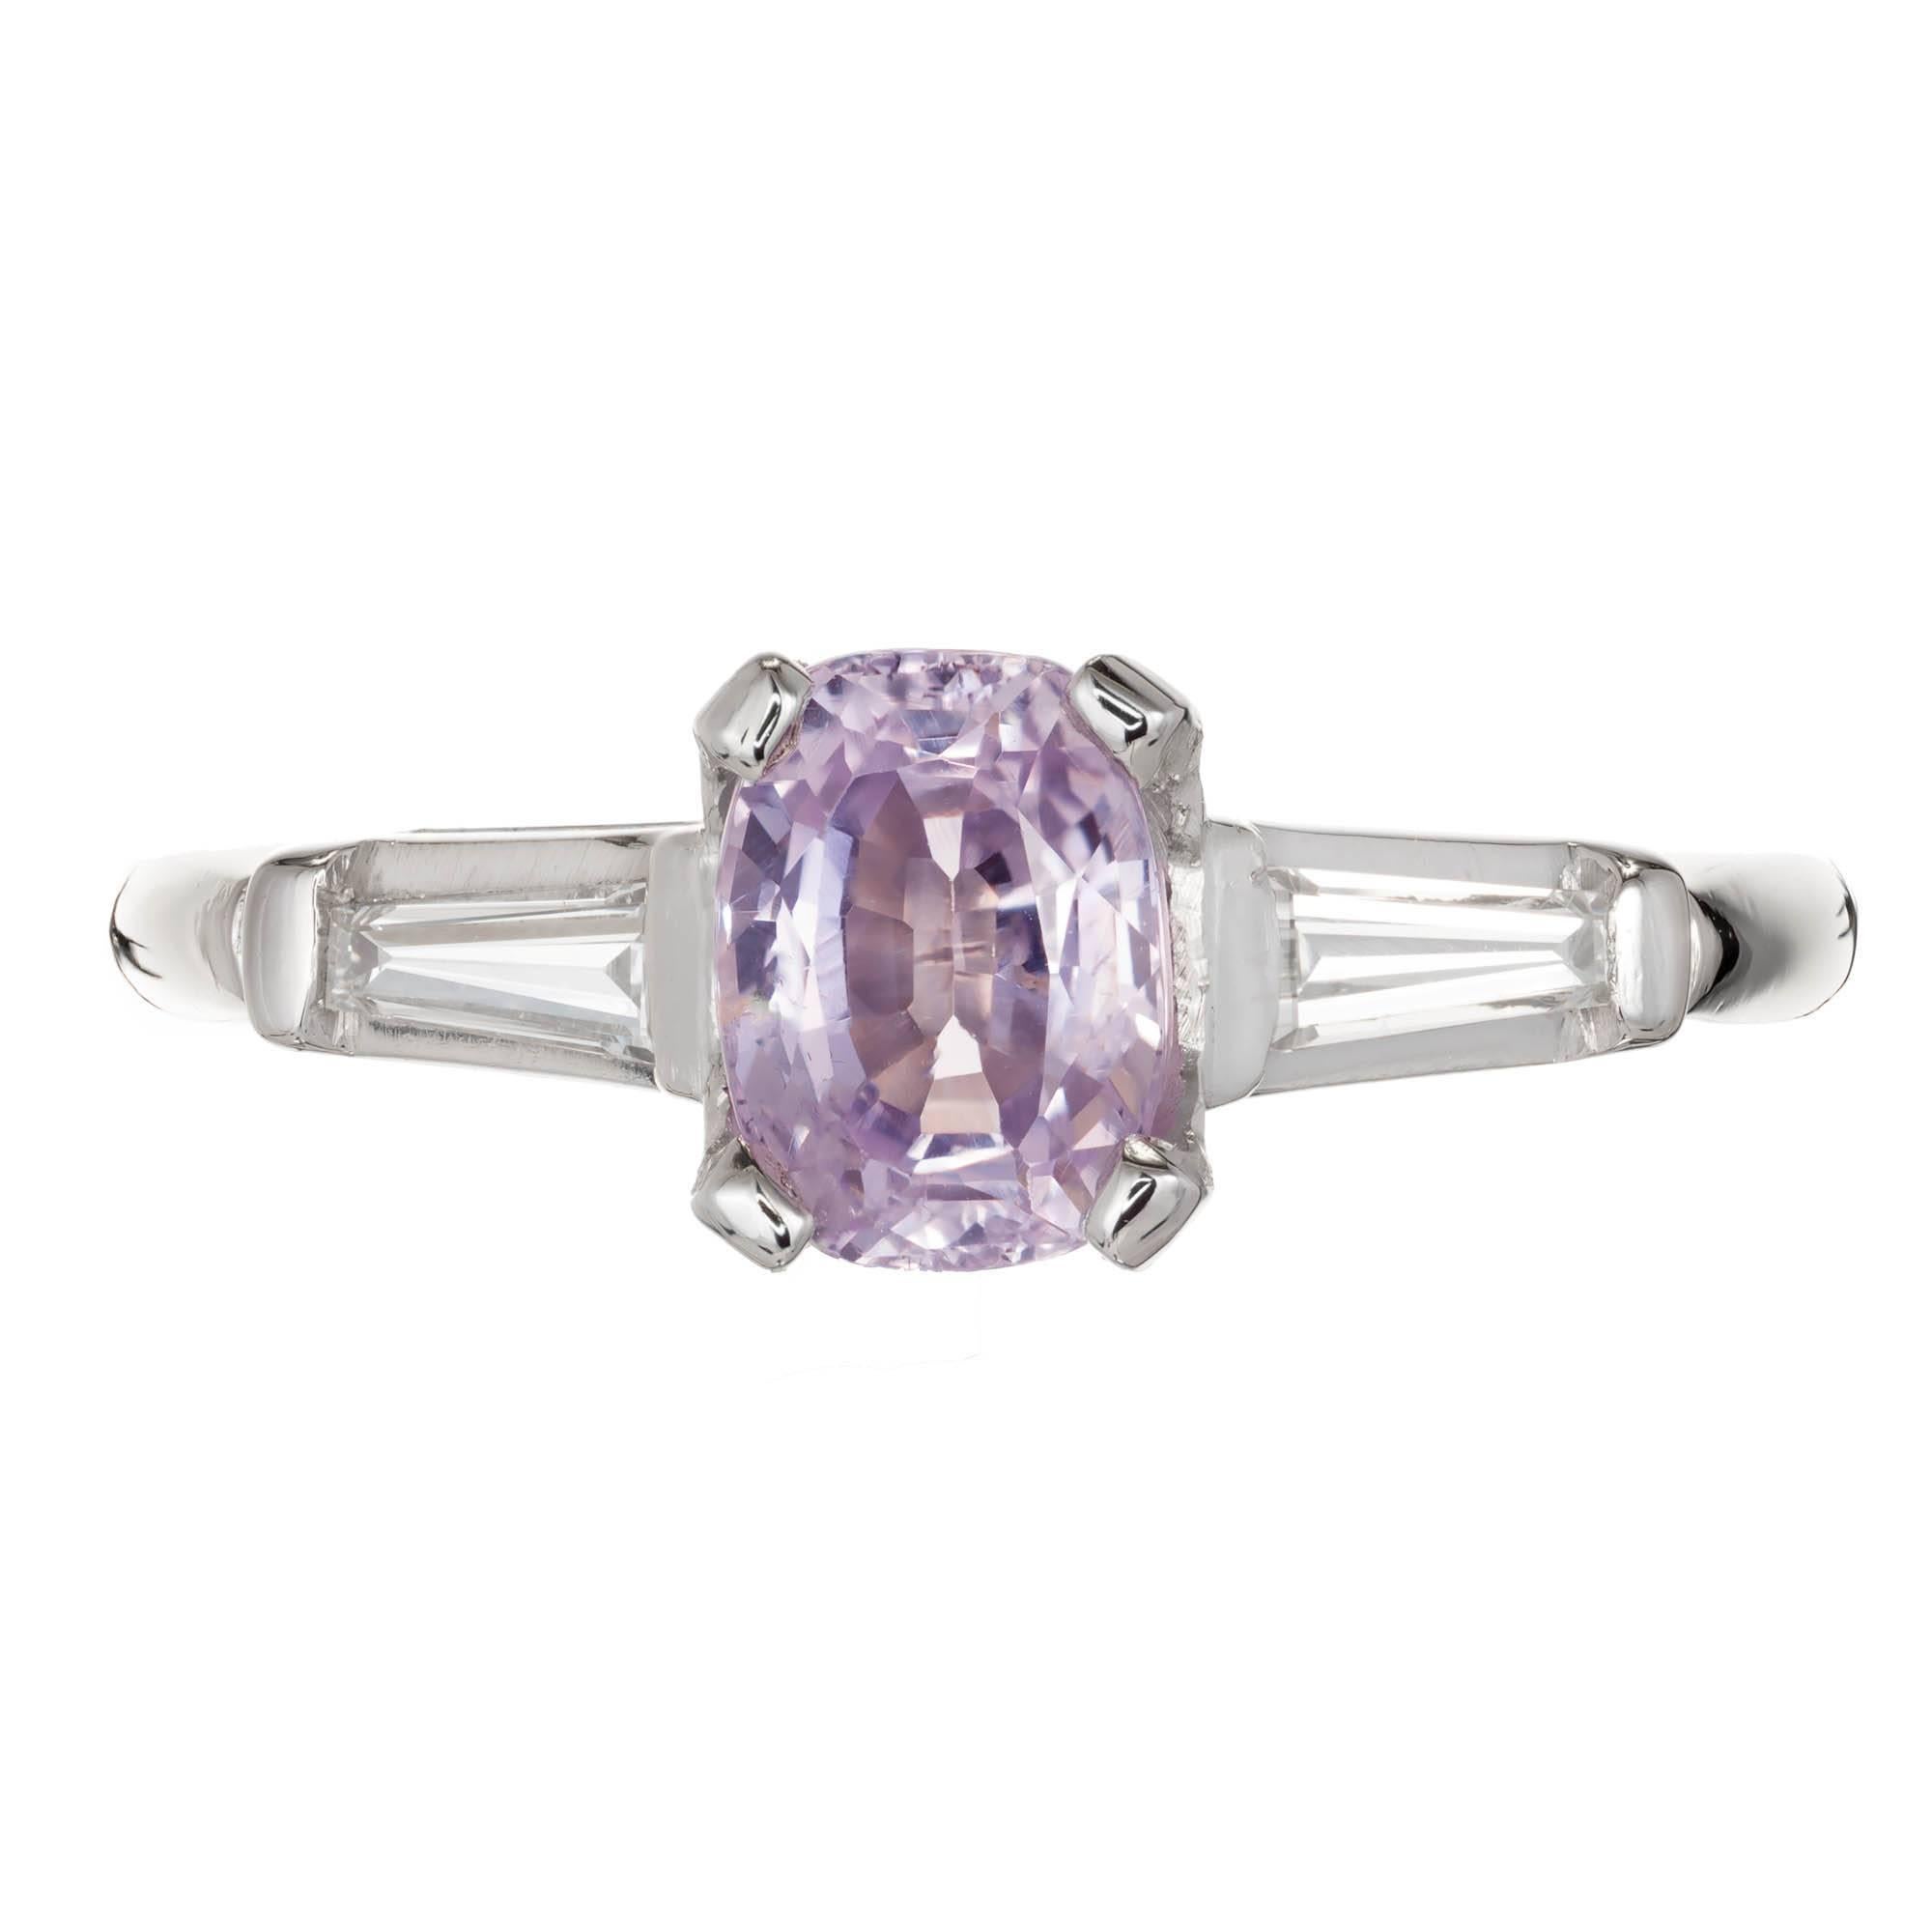 Natural GIA certified antique cushion cut purple sapphire and diamond three-stone engagement ring.  Platinum setting with two tapered baguette accent Diamonds.  

1 cushion cut light purple Sapphire, approx. total weight 1.18cts, VS, 6.88 x 5.0 x